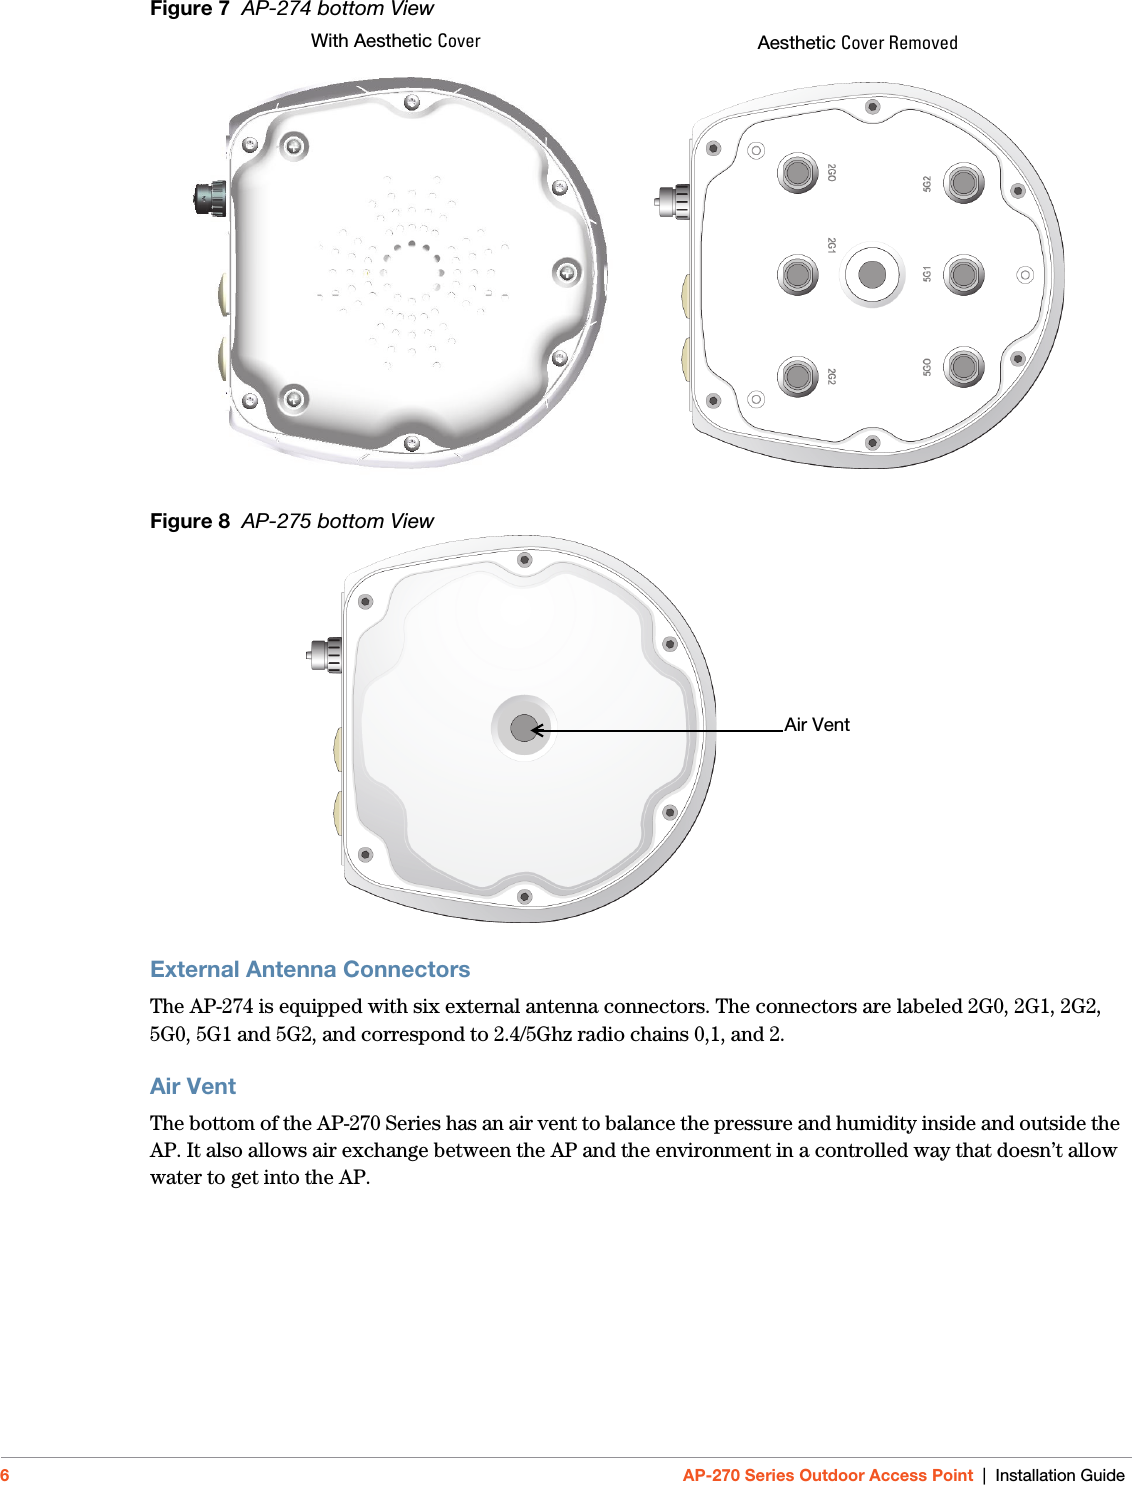 6AP-270 Series Outdoor Access Point | Installation GuideFigure 7  AP-274 bottom ViewFigure 8  AP-275 bottom ViewExternal Antenna ConnectorsThe AP-274 is equipped with six external antenna connectors. The connectors are labeled 2G0, 2G1, 2G2, 5G0, 5G1 and 5G2, and correspond to 2.4/5Ghz radio chains 0,1, and 2.Air VentThe bottom of the AP-270 Series has an air vent to balance the pressure and humidity inside and outside the AP. It also allows air exchange between the AP and the environment in a controlled way that doesn’t allow water to get into the AP.With Aesthetic Cover Aesthetic Cover RemovedAir Vent